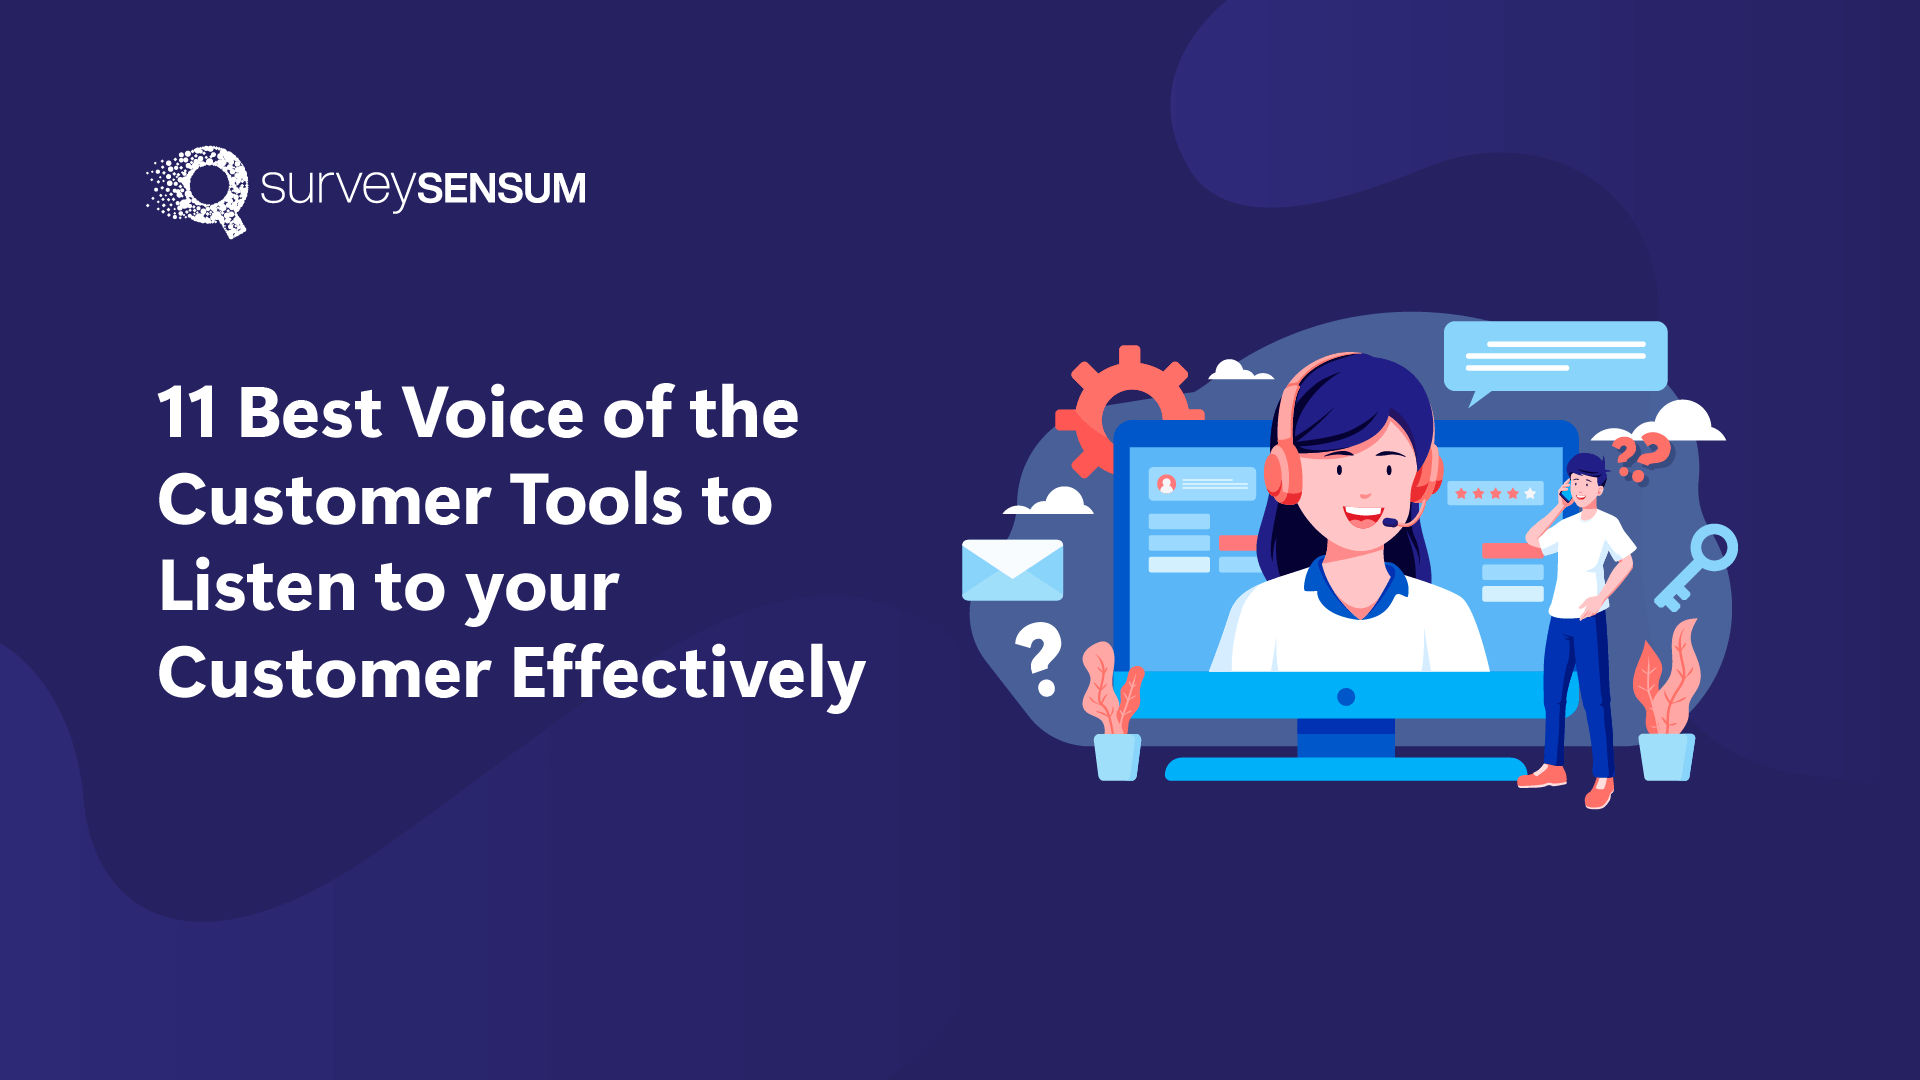 11 Best Voice of the Customer tools to Listen to your Customers Effectively